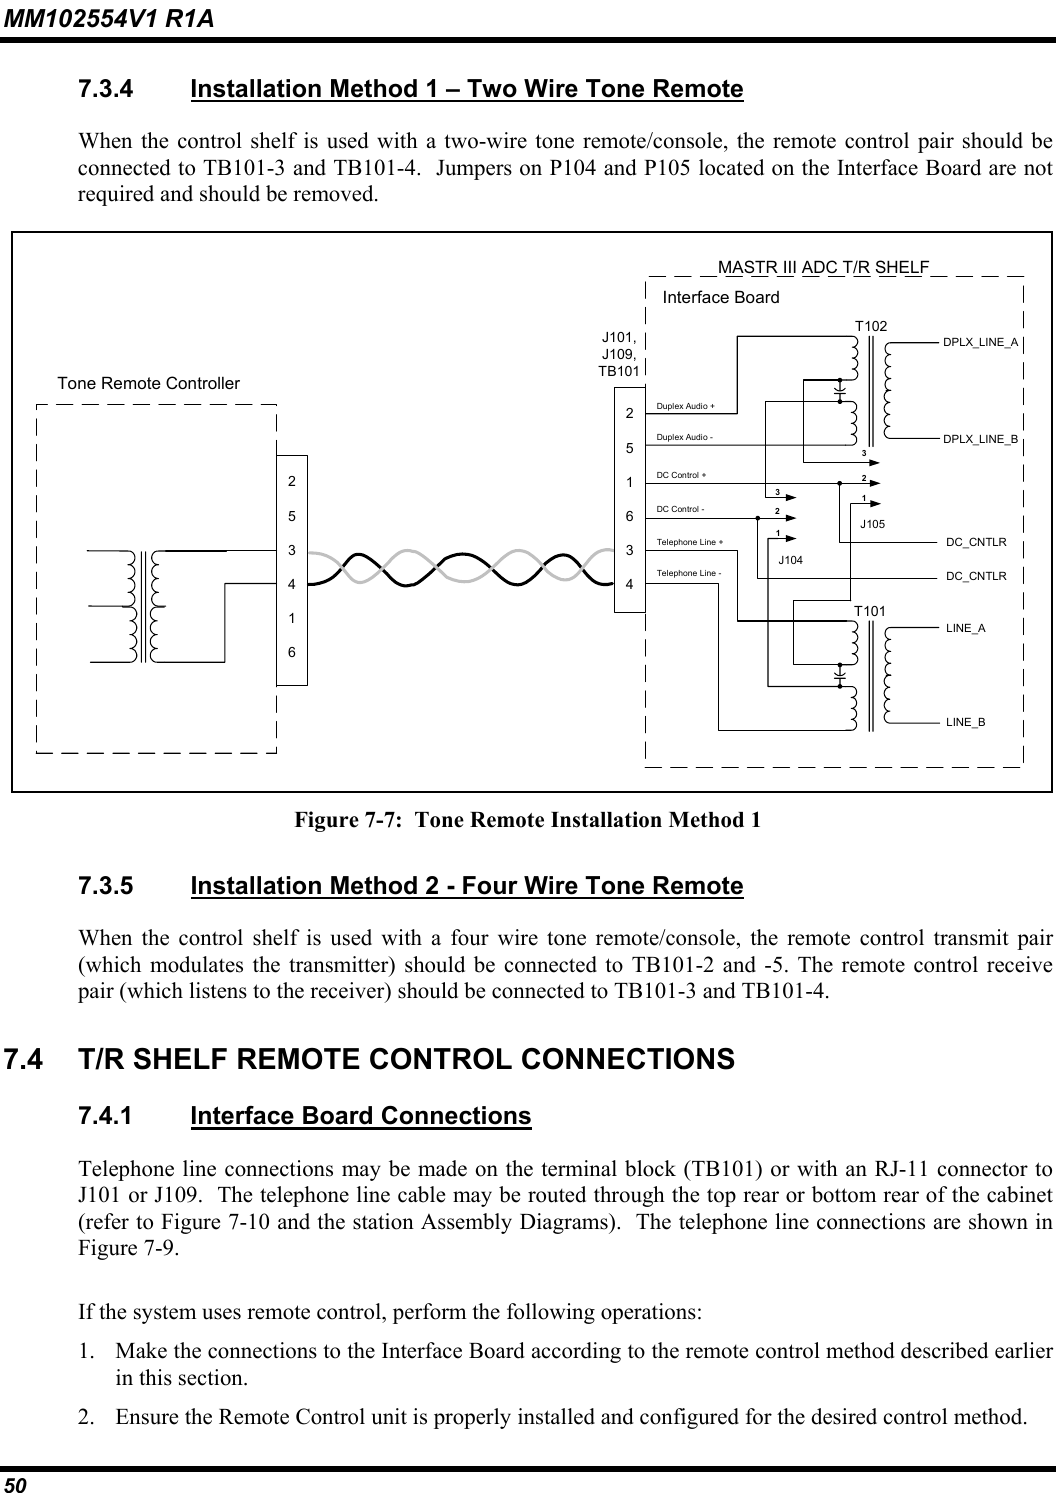 MM102554V1 R1A 50   7.3.4  Installation Method 1 – Two Wire Tone Remote When the control shelf is used with a two-wire tone remote/console, the remote control pair should be connected to TB101-3 and TB101-4.  Jumpers on P104 and P105 located on the Interface Board are not required and should be removed.  J101,J109,TB101253416T101LINE_ALINE_BDC_CNTLRDC_CNTLRTelephone Line +Telephone Line -Tone Remote ControllerMASTR III ADC T/R SHELFInterface BoardDC Control +DC Control -J104123J105123T102DPLX_LINE_ADPLX_LINE_BDuplex Audio +Duplex Audio -251634 Figure 7-7:  Tone Remote Installation Method 1 7.3.5  Installation Method 2 - Four Wire Tone Remote When the control shelf is used with a four wire tone remote/console, the remote control transmit pair (which modulates the transmitter) should be connected to TB101-2 and -5. The remote control receive pair (which listens to the receiver) should be connected to TB101-3 and TB101-4.  7.4  T/R SHELF REMOTE CONTROL CONNECTIONS 7.4.1  Interface Board Connections Telephone line connections may be made on the terminal block (TB101) or with an RJ-11 connector to J101 or J109.  The telephone line cable may be routed through the top rear or bottom rear of the cabinet (refer to Figure 7-10 and the station Assembly Diagrams).  The telephone line connections are shown in Figure 7-9. If the system uses remote control, perform the following operations: 1.  Make the connections to the Interface Board according to the remote control method described earlier in this section.   2.  Ensure the Remote Control unit is properly installed and configured for the desired control method. 